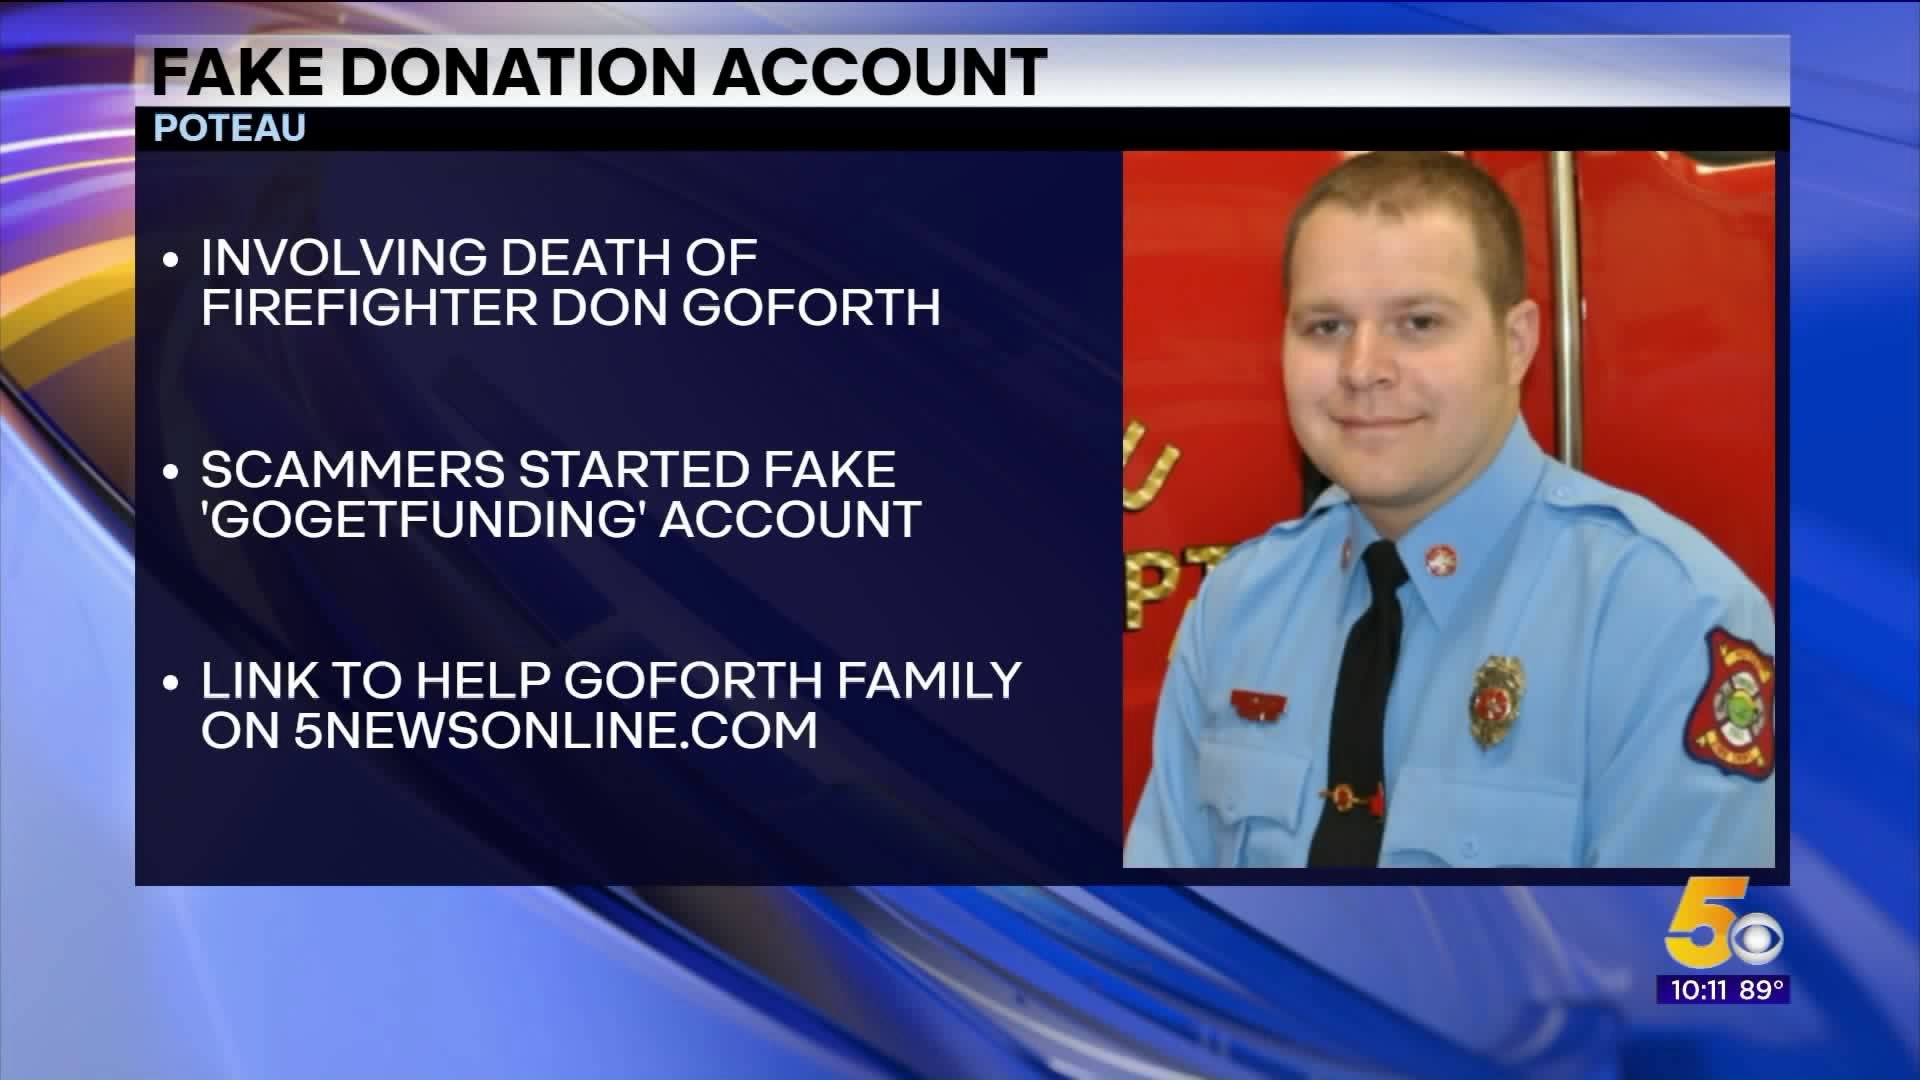 Fake Donation Account For Poteau Firefighter Who Died From Cancer